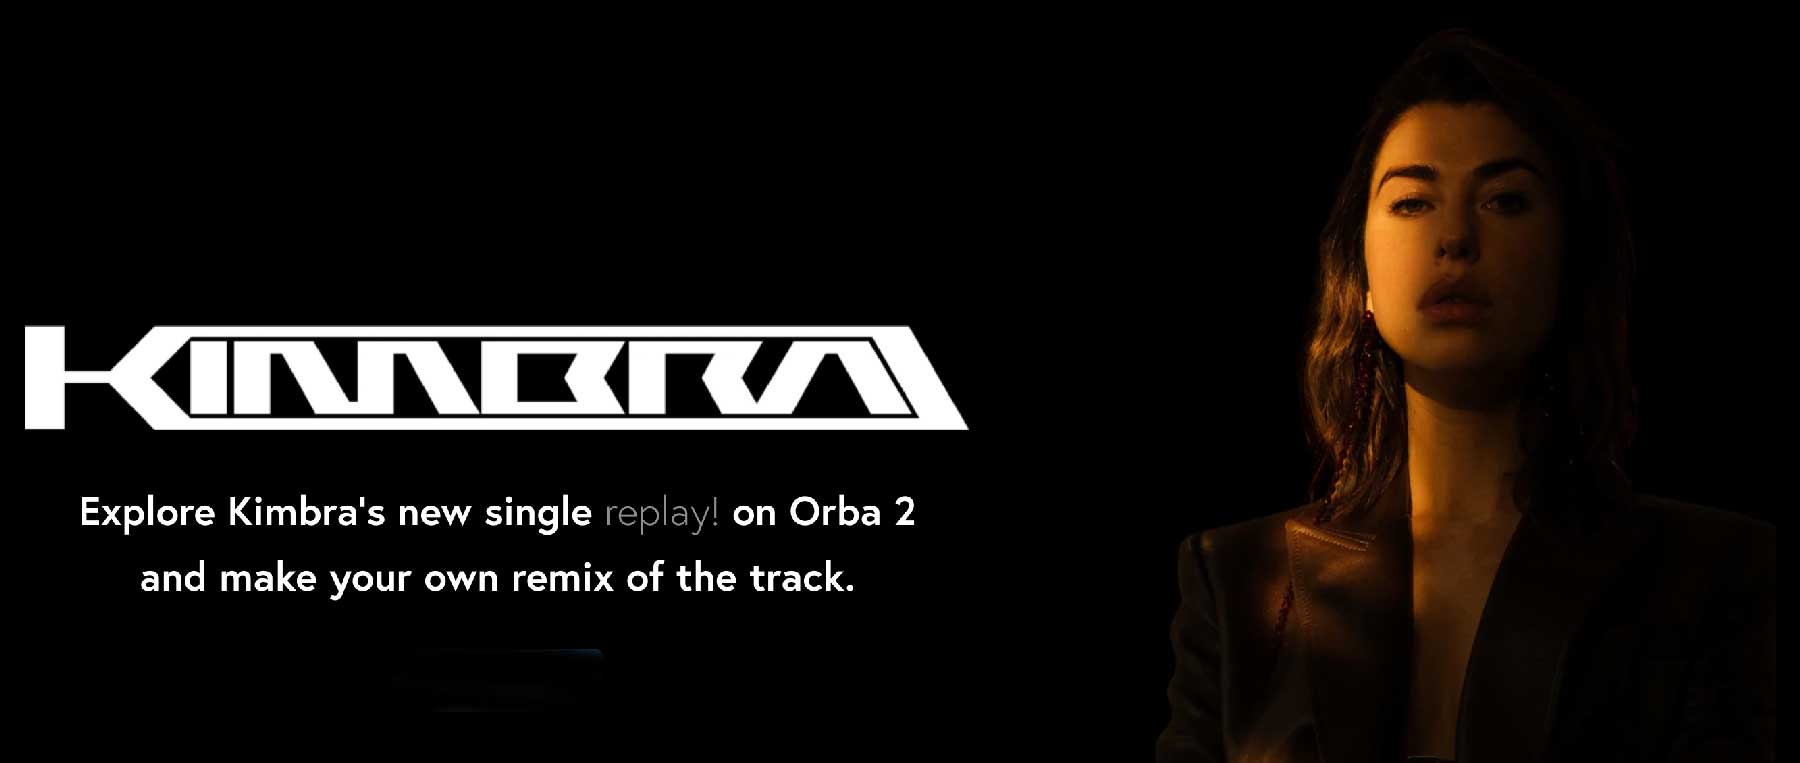 Orba 2 Update Lets You Remix Artist Songs, Starting with Kimbra’s New Single